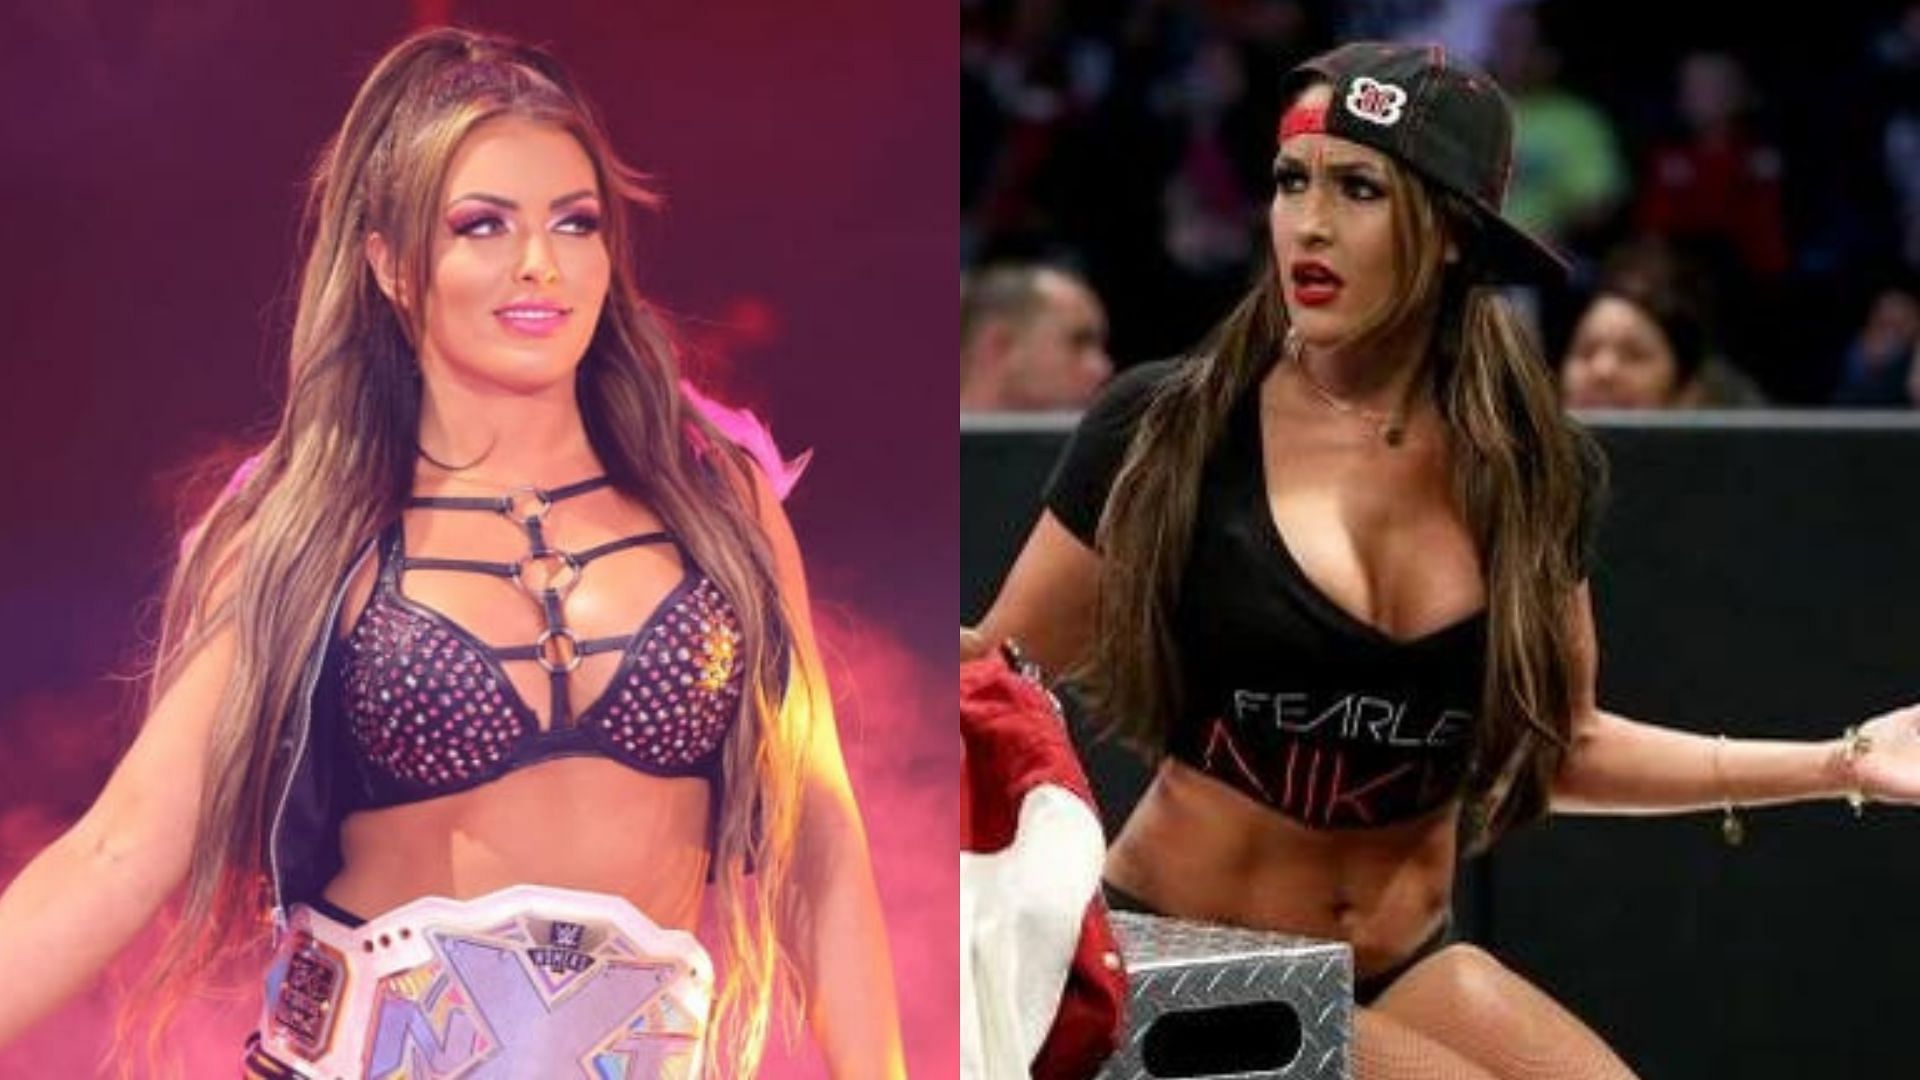 Mandy Rose cosplayed as Nikki Bella at a recent NXT live event